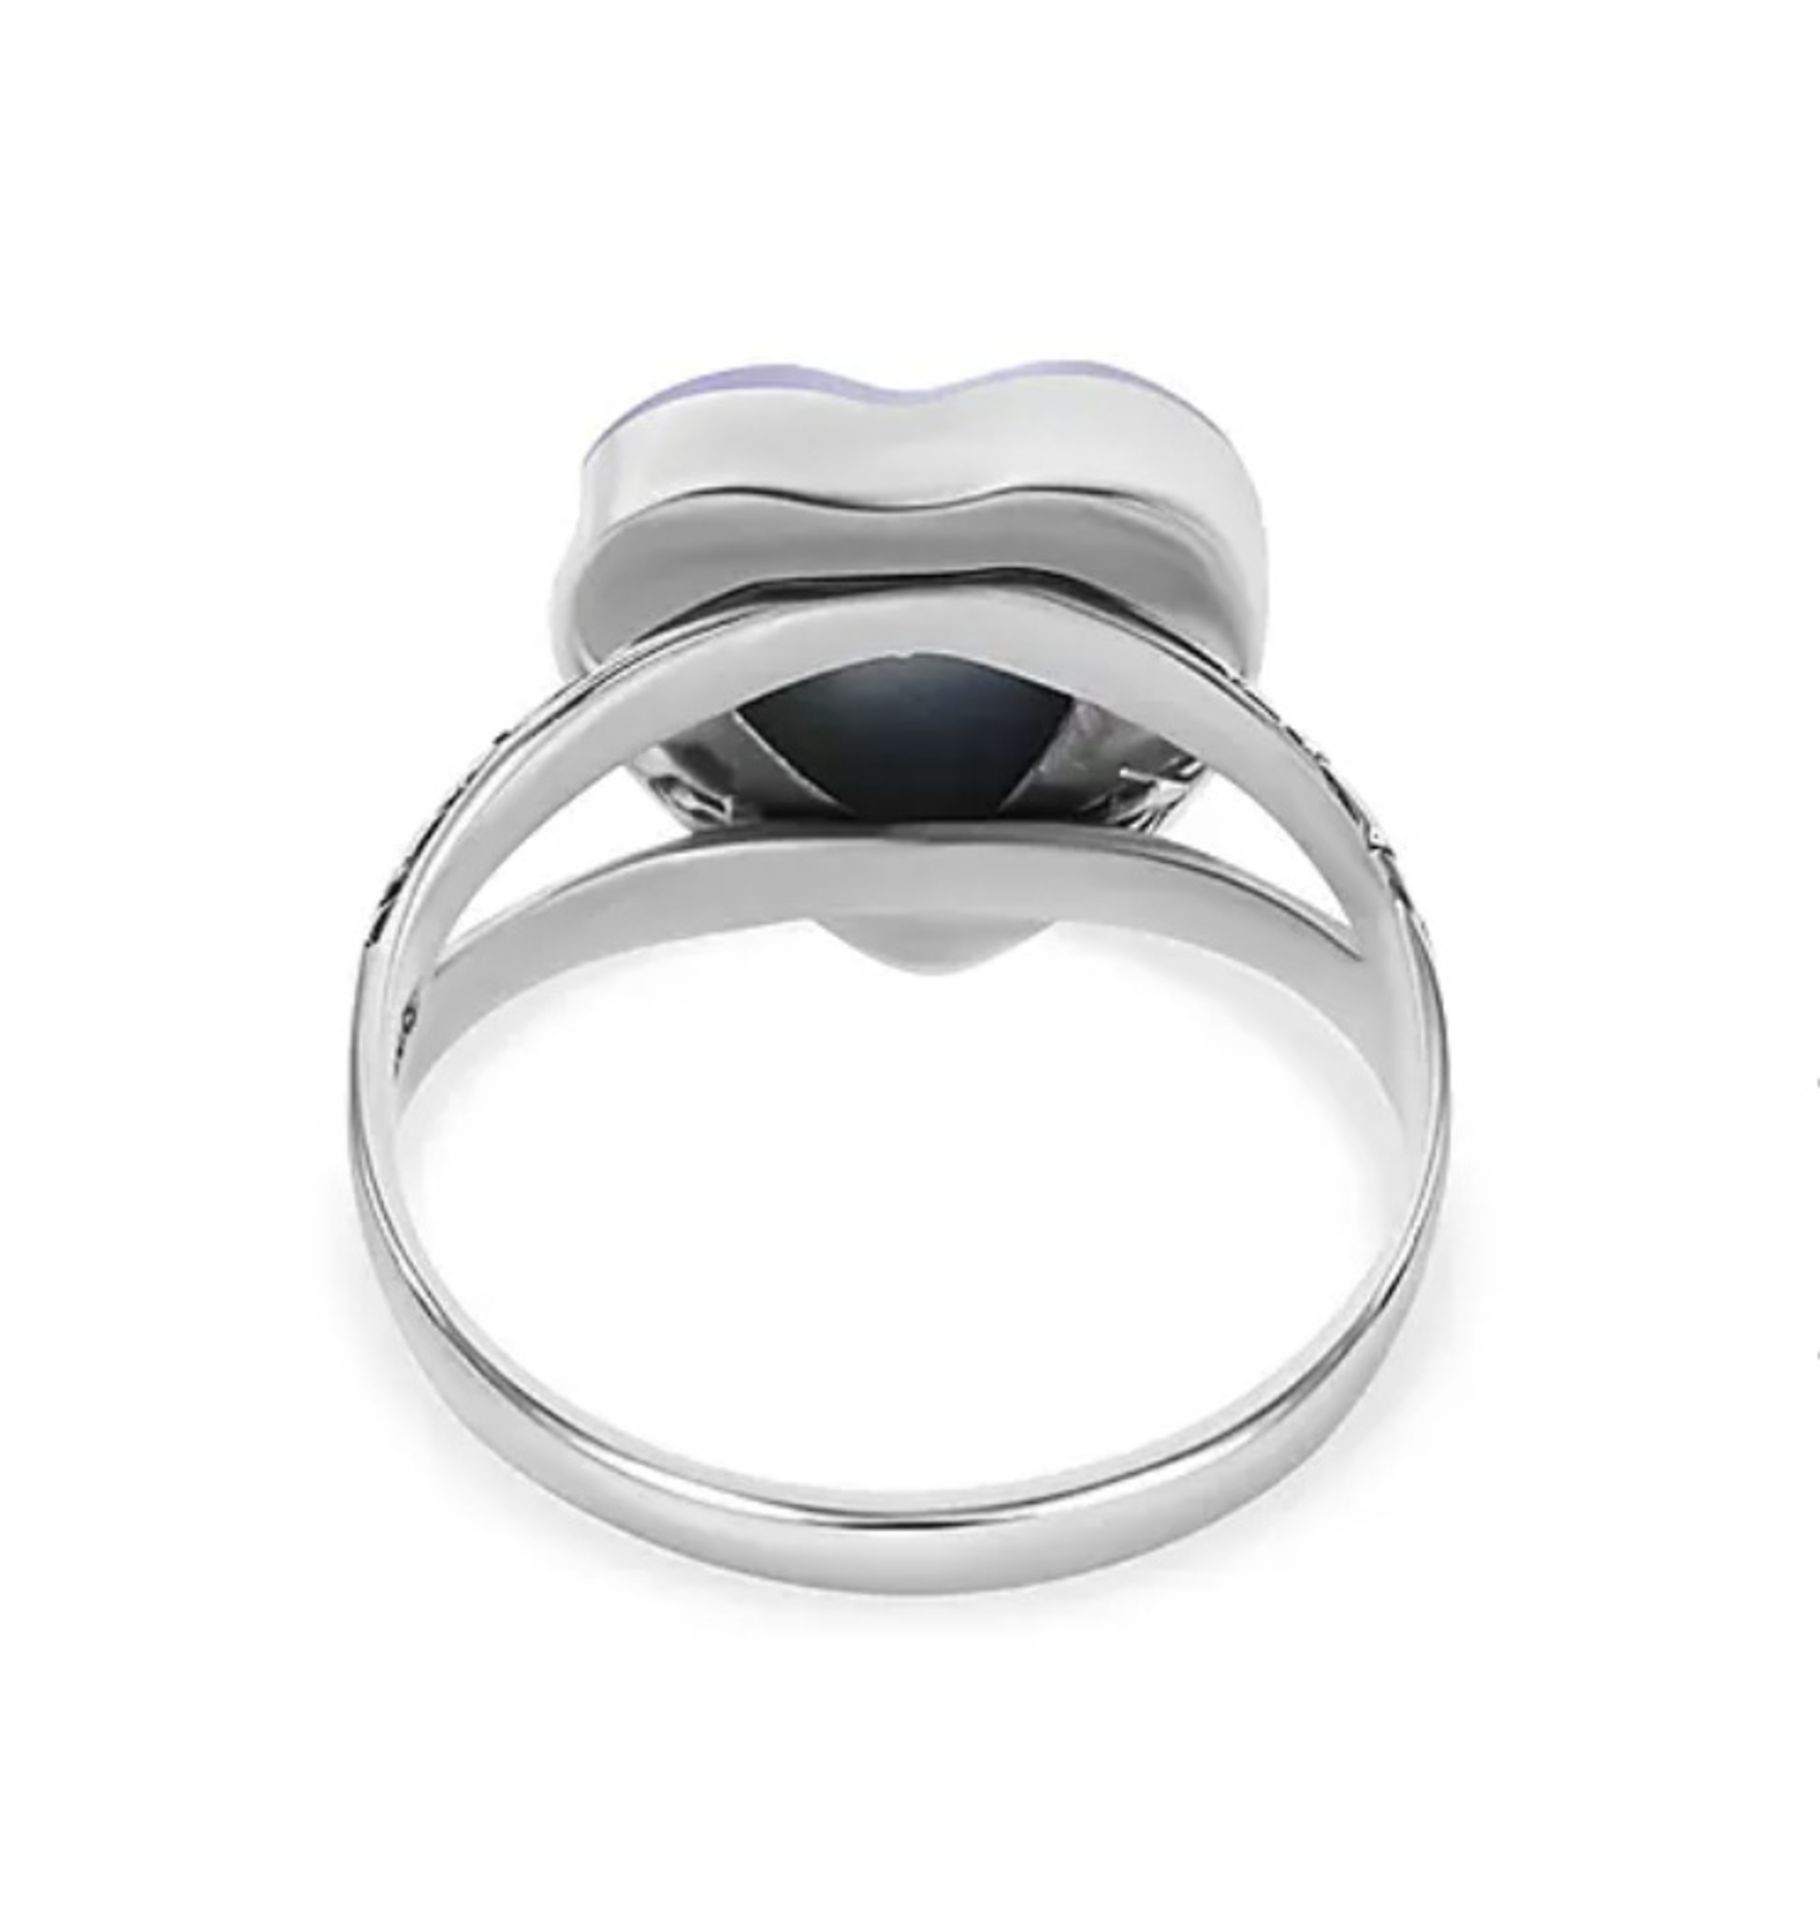 NEW! Blue Mabe Pearl Heart Ring - Image 5 of 5